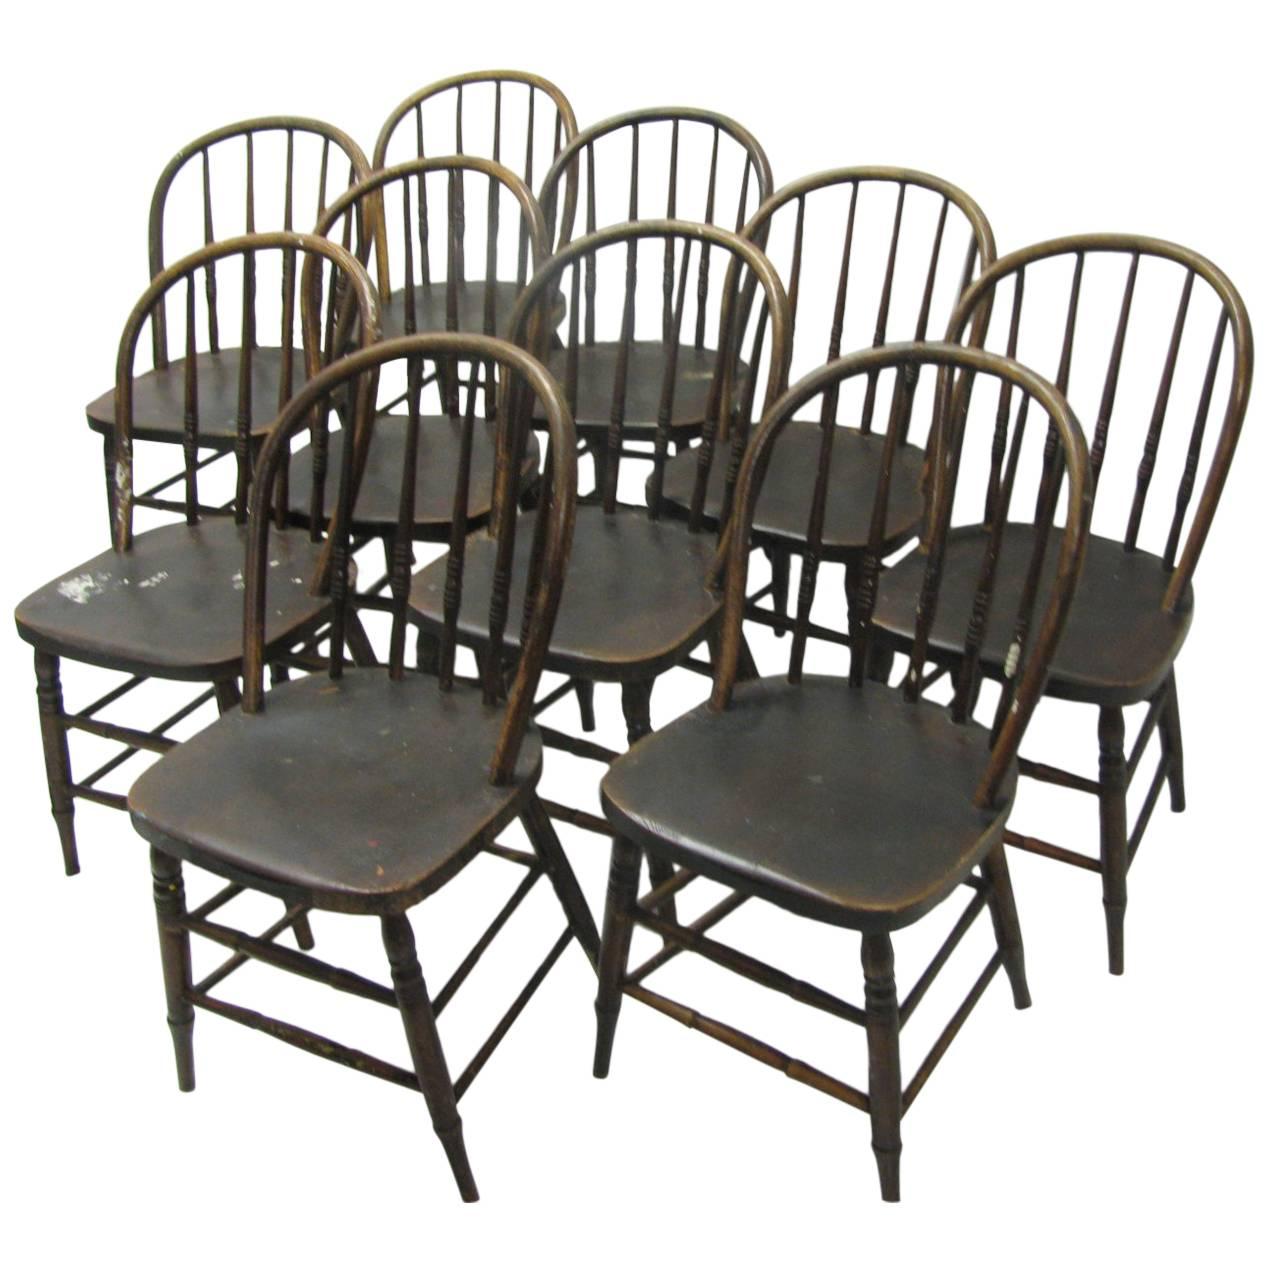 Classic Set of Ten Primitive Windsor Bow Back Chairs